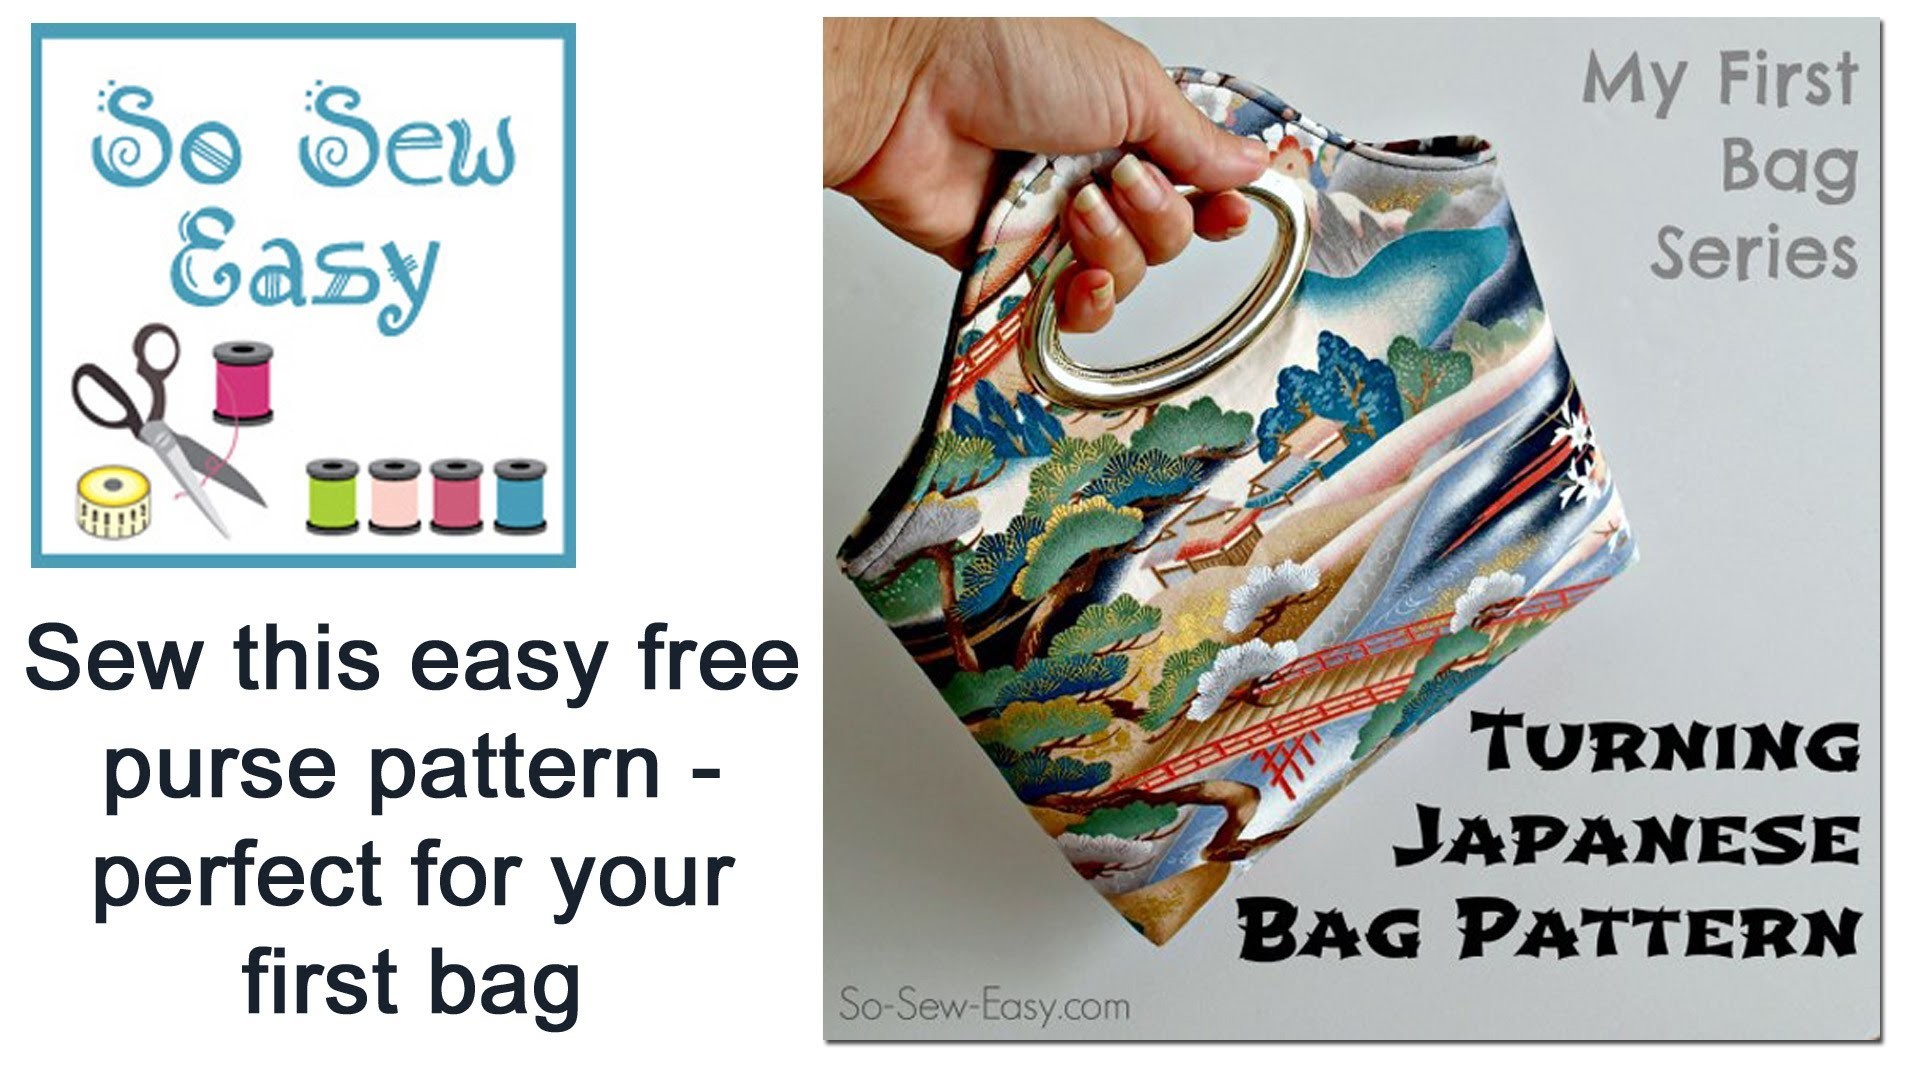 This bag is for. Sewing pattern Japanese Bag. Журнале "Bag Japan".. Japanese Bag. So Sew easy.